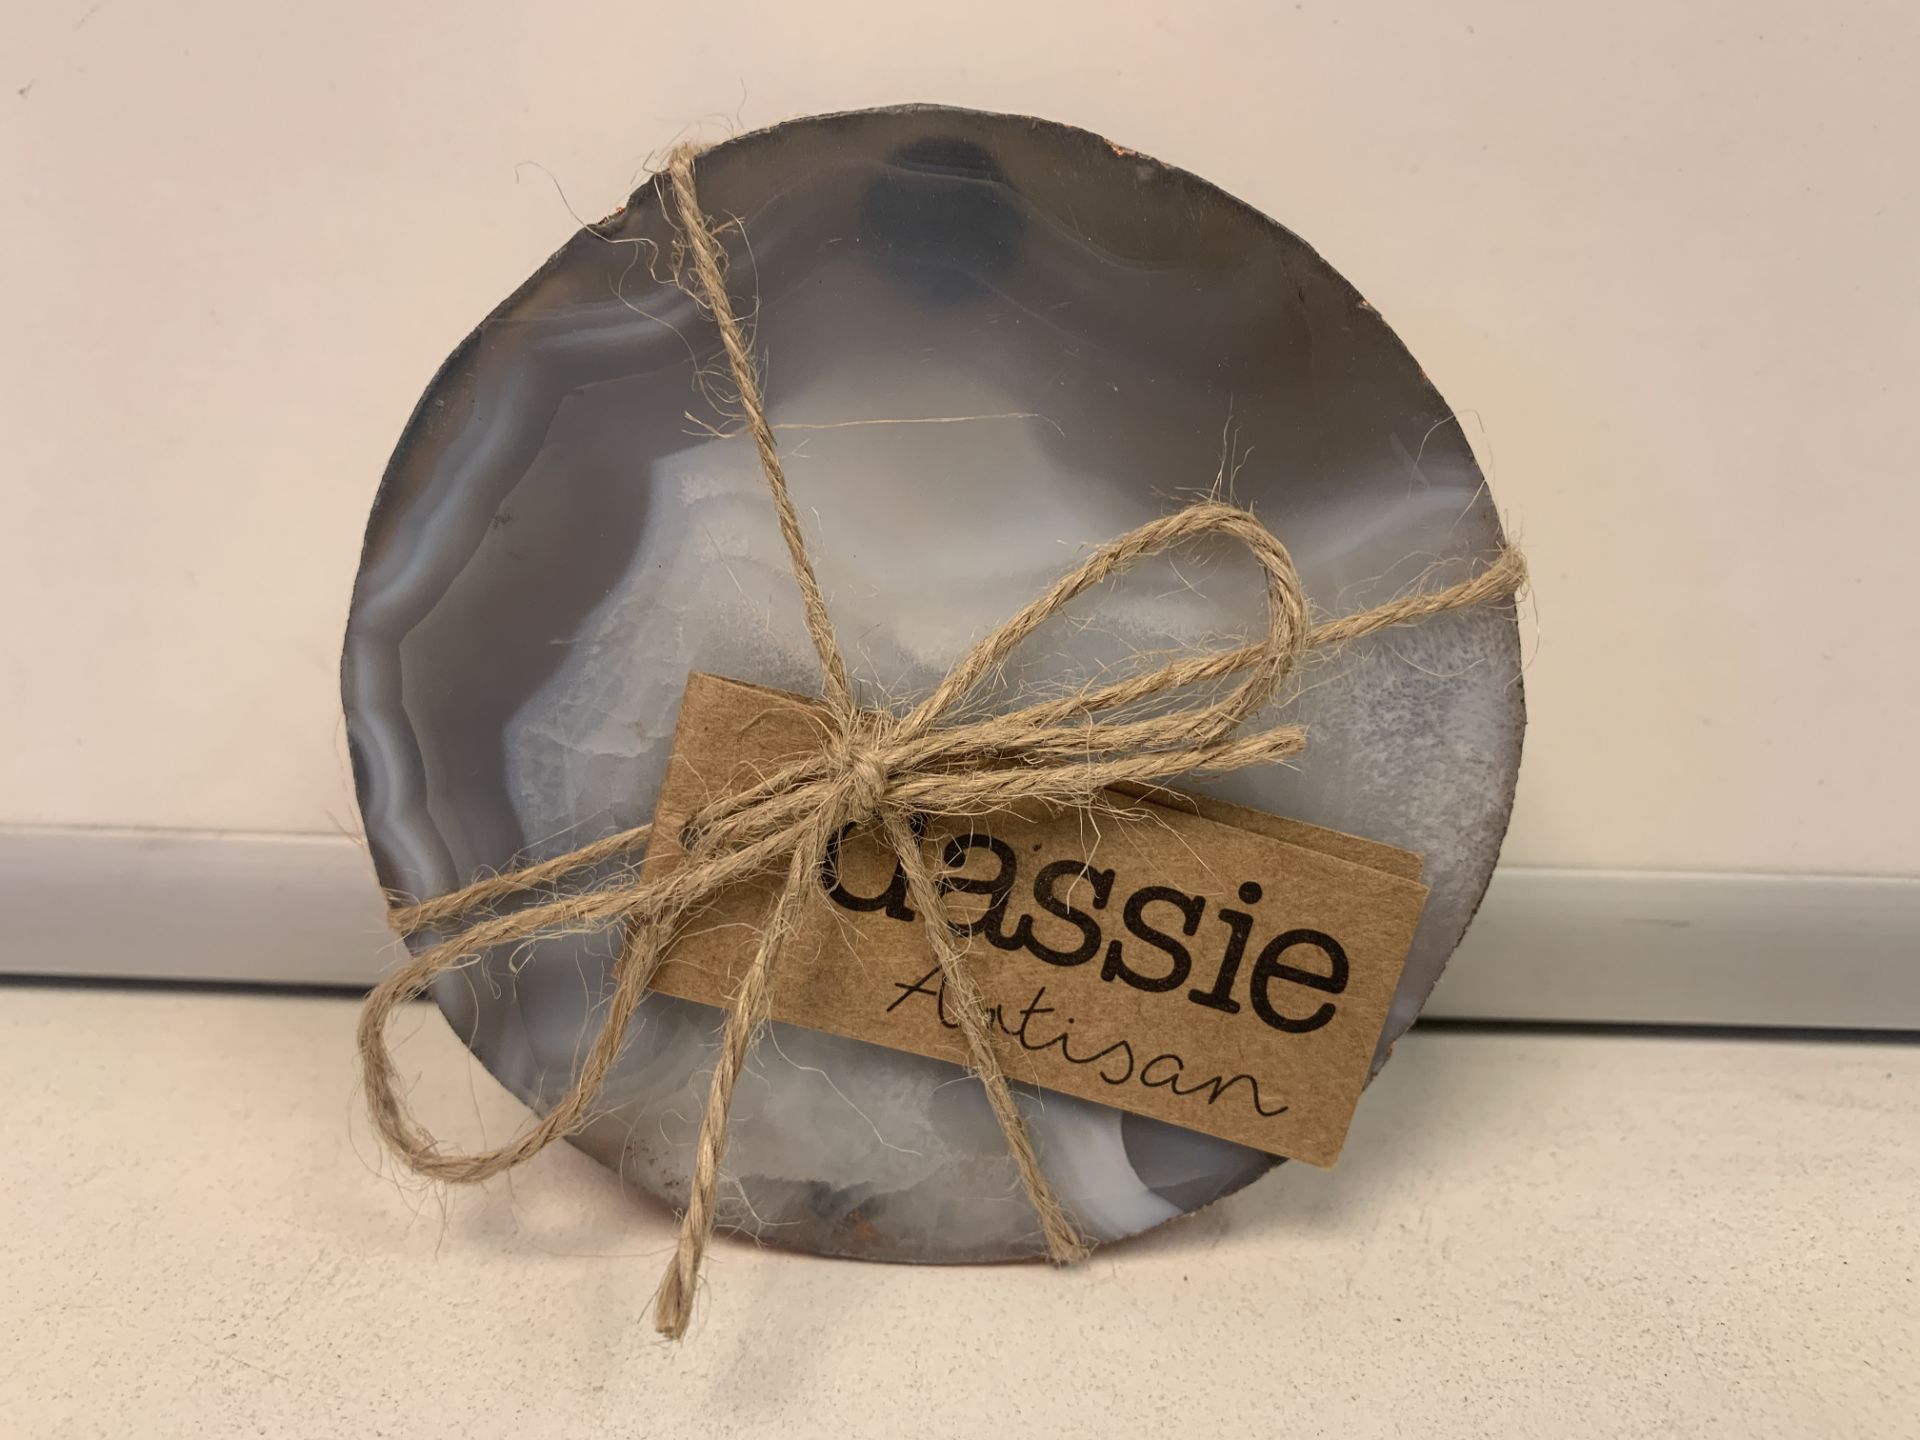 20 X BRAND NEW DASSIE ARTISAN SETS OF 4 COASTER (DESIGNS MAY VARY)